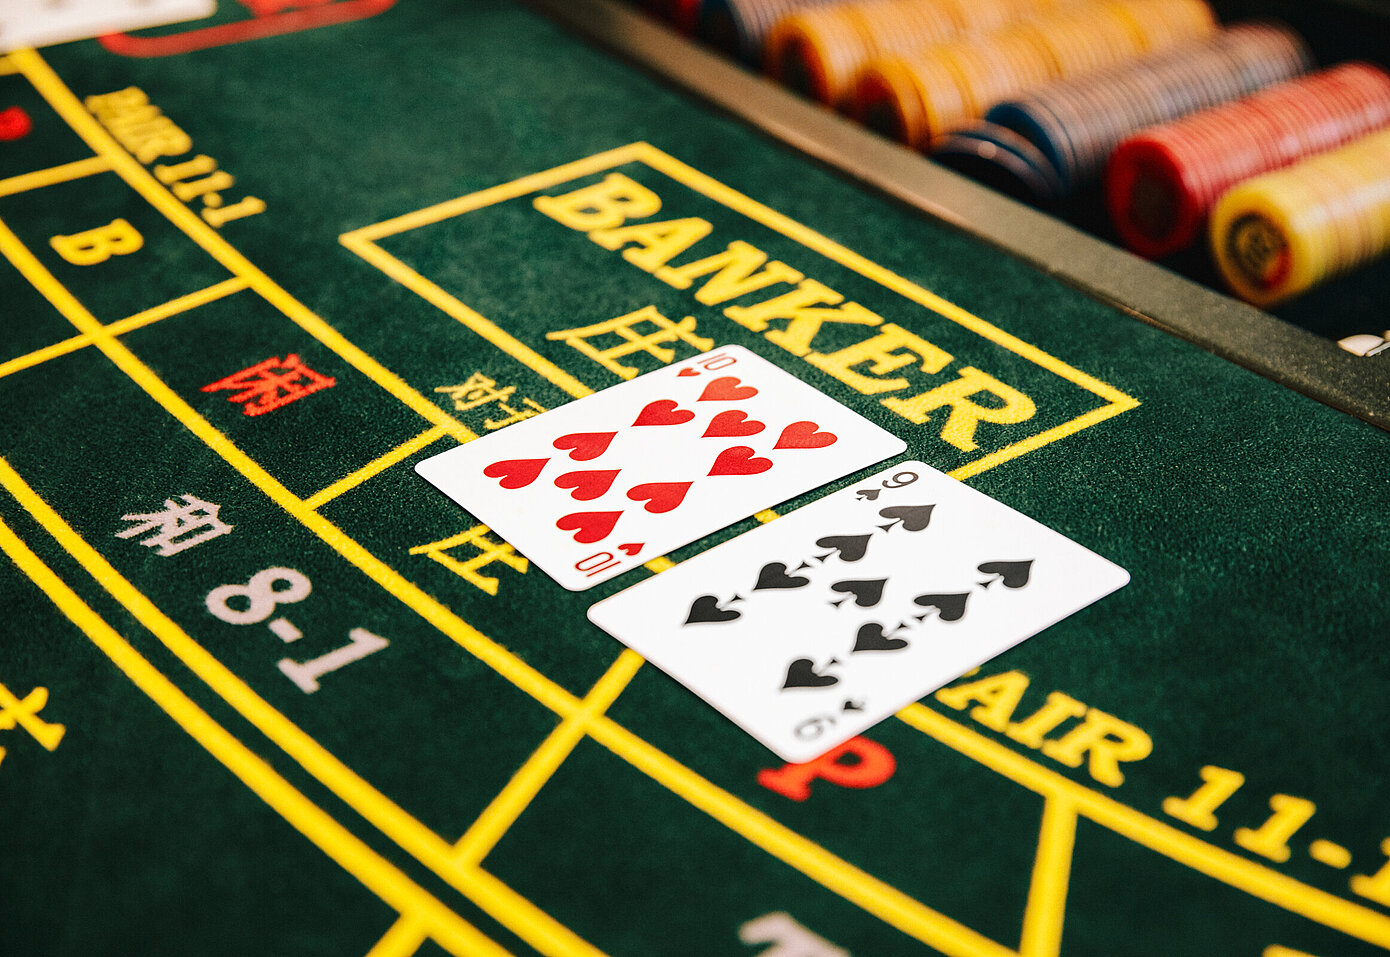 Find out how to apply for baccarat correctly